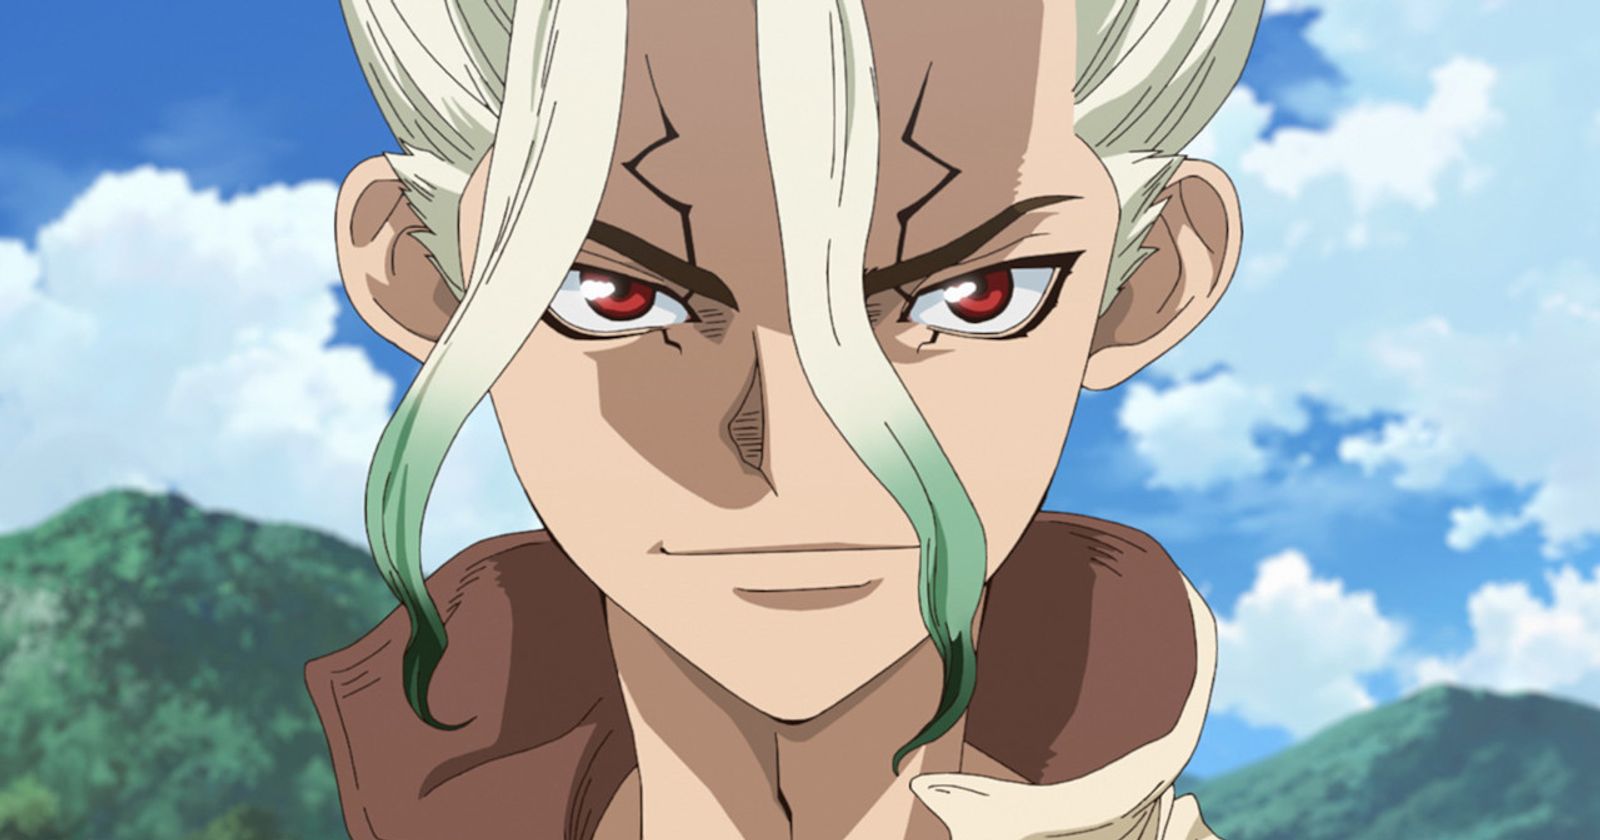 Dr. STONE New World returns this October 12